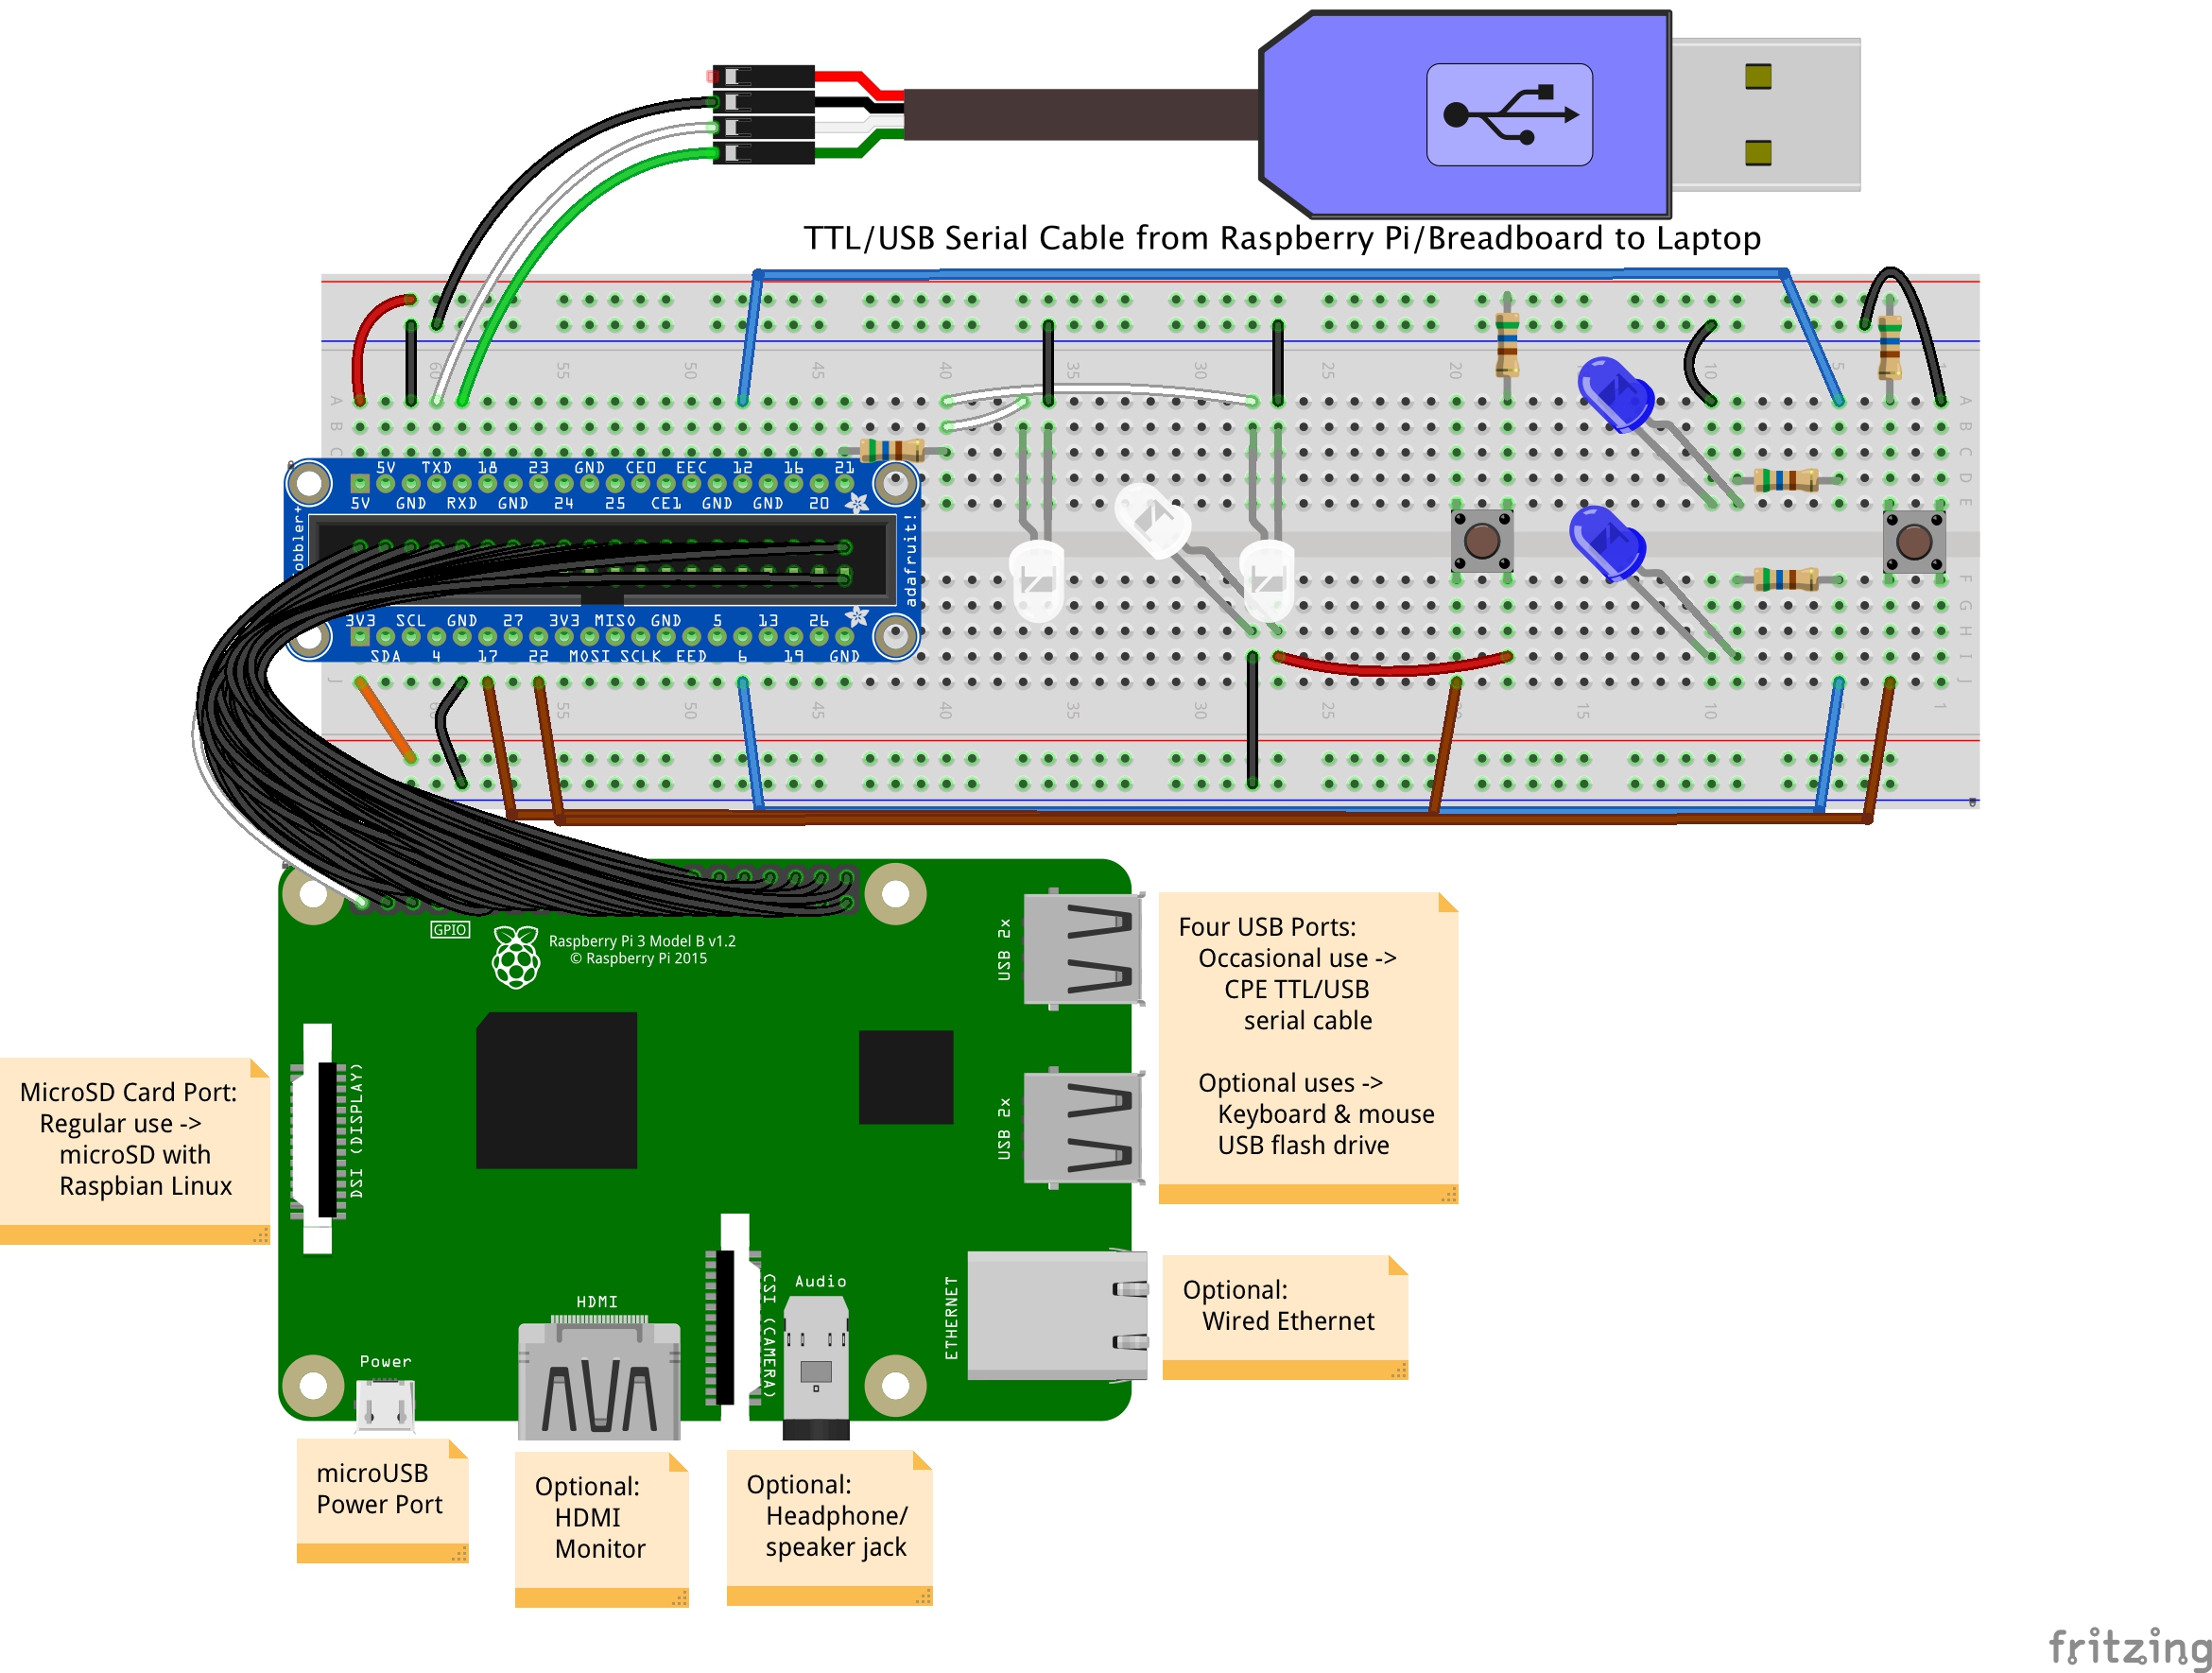 A diagram of the Raspberry Pi connected to the breadboard connected to the TTL to USB cable, which can be plugged into a laptop.